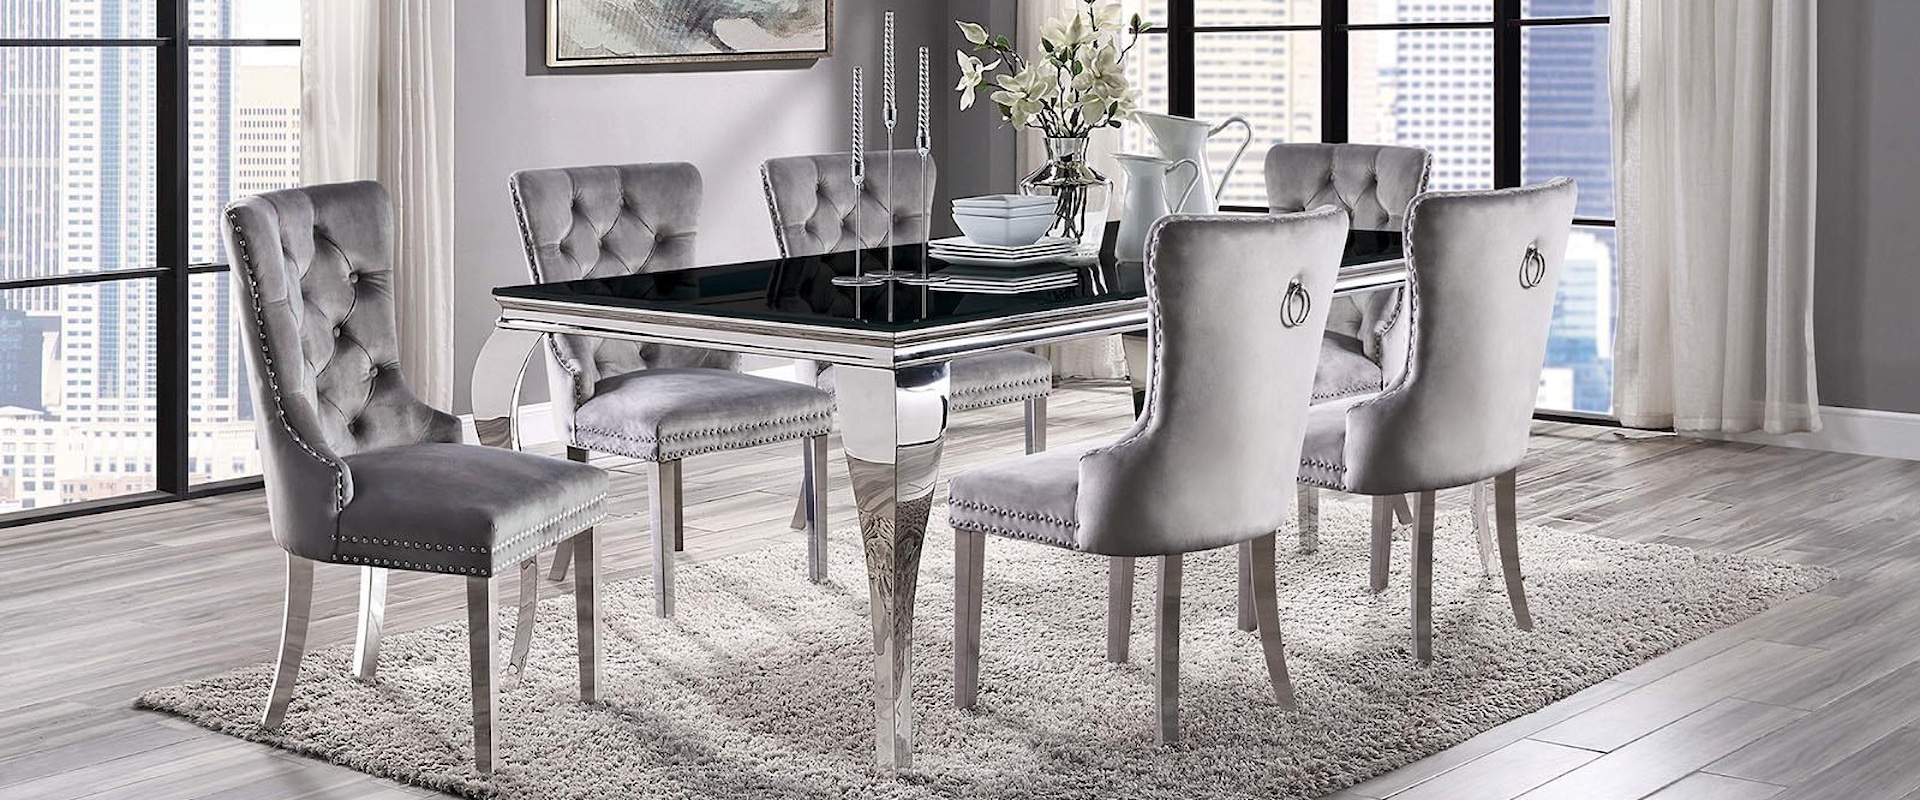 7 Pc. Dining Table Set, Grey  Chairs